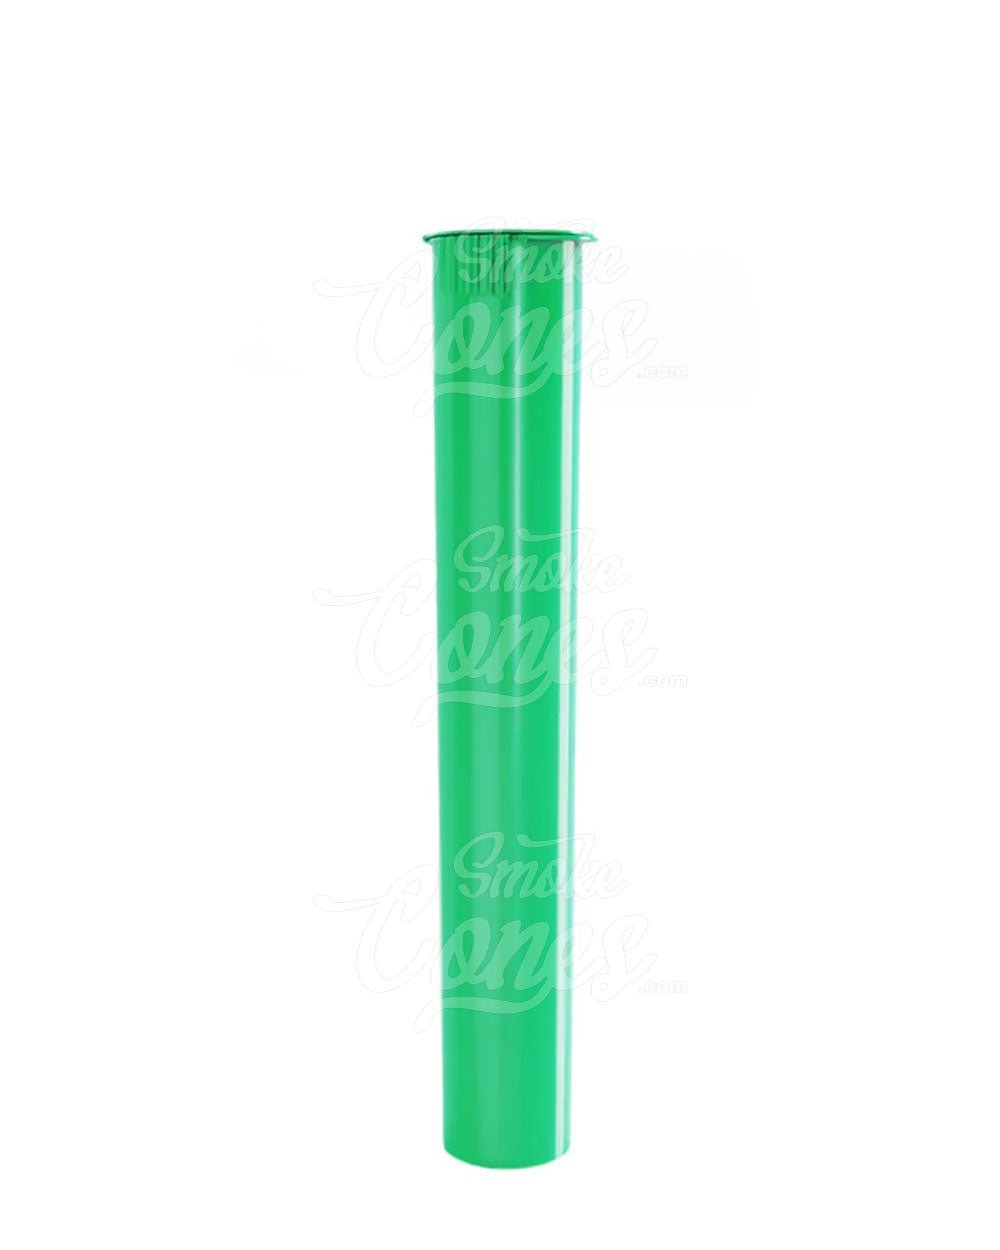 116mm Green Translucent Child Resistant Pop Top Pre-Roll Tubes 1000/Box - 2